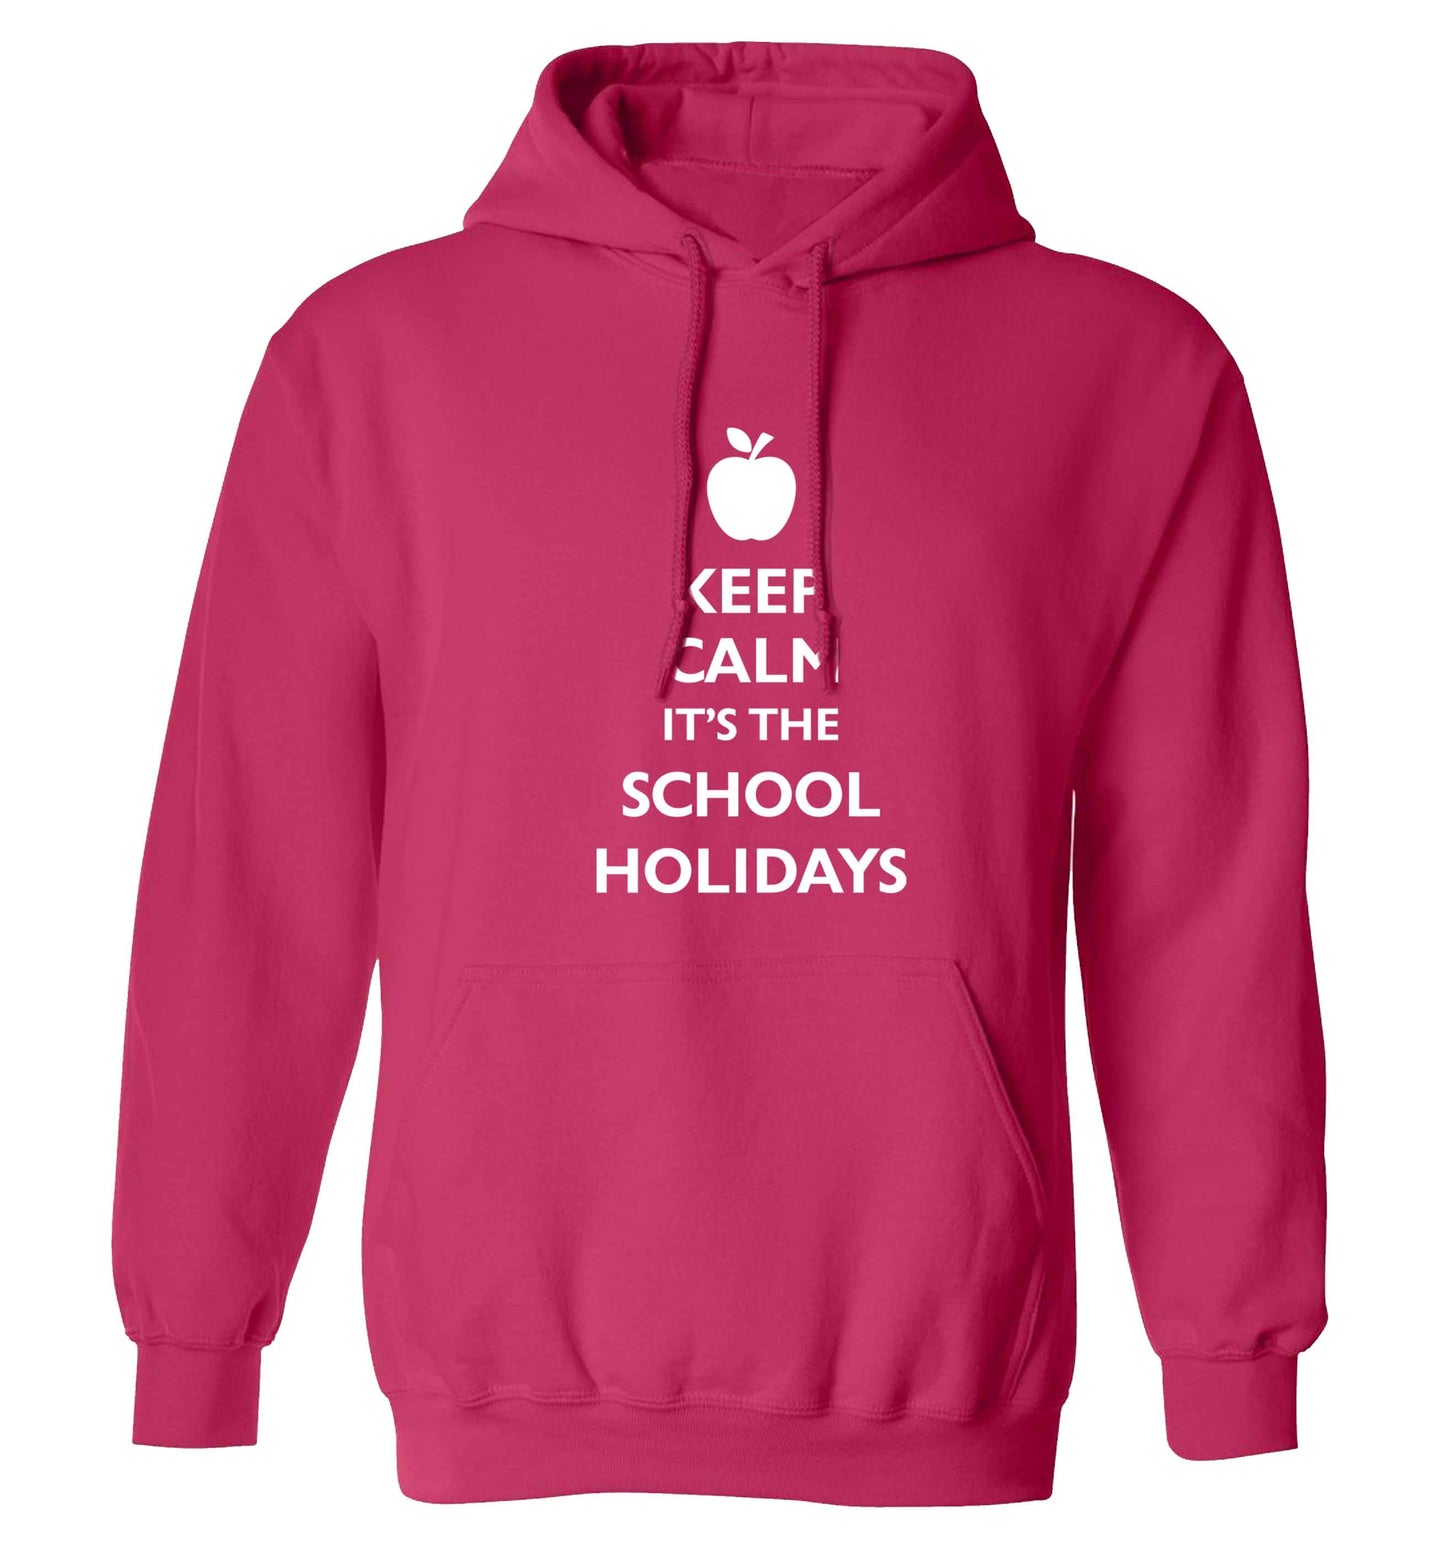 Keep calm it's the school holidays adults unisex pink hoodie 2XL